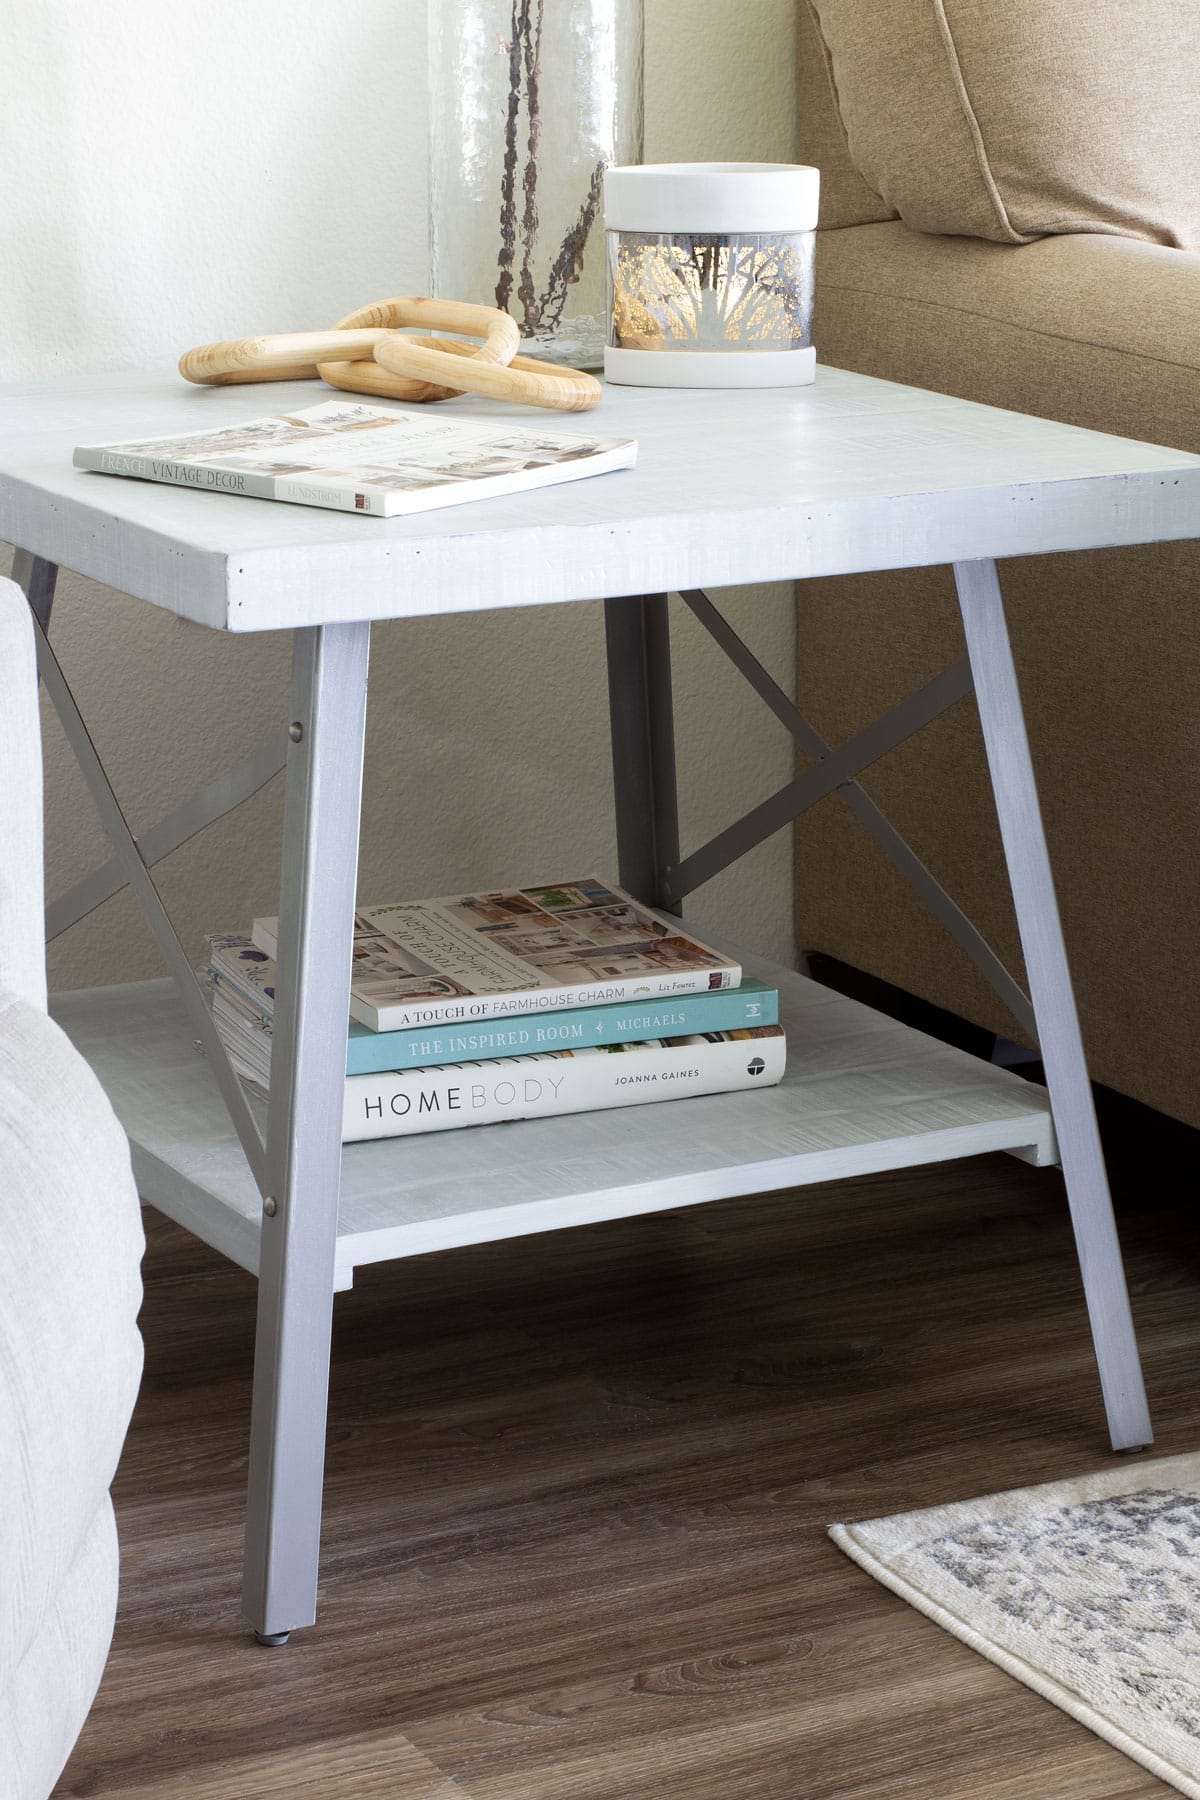 light gray sidetable with books and decor